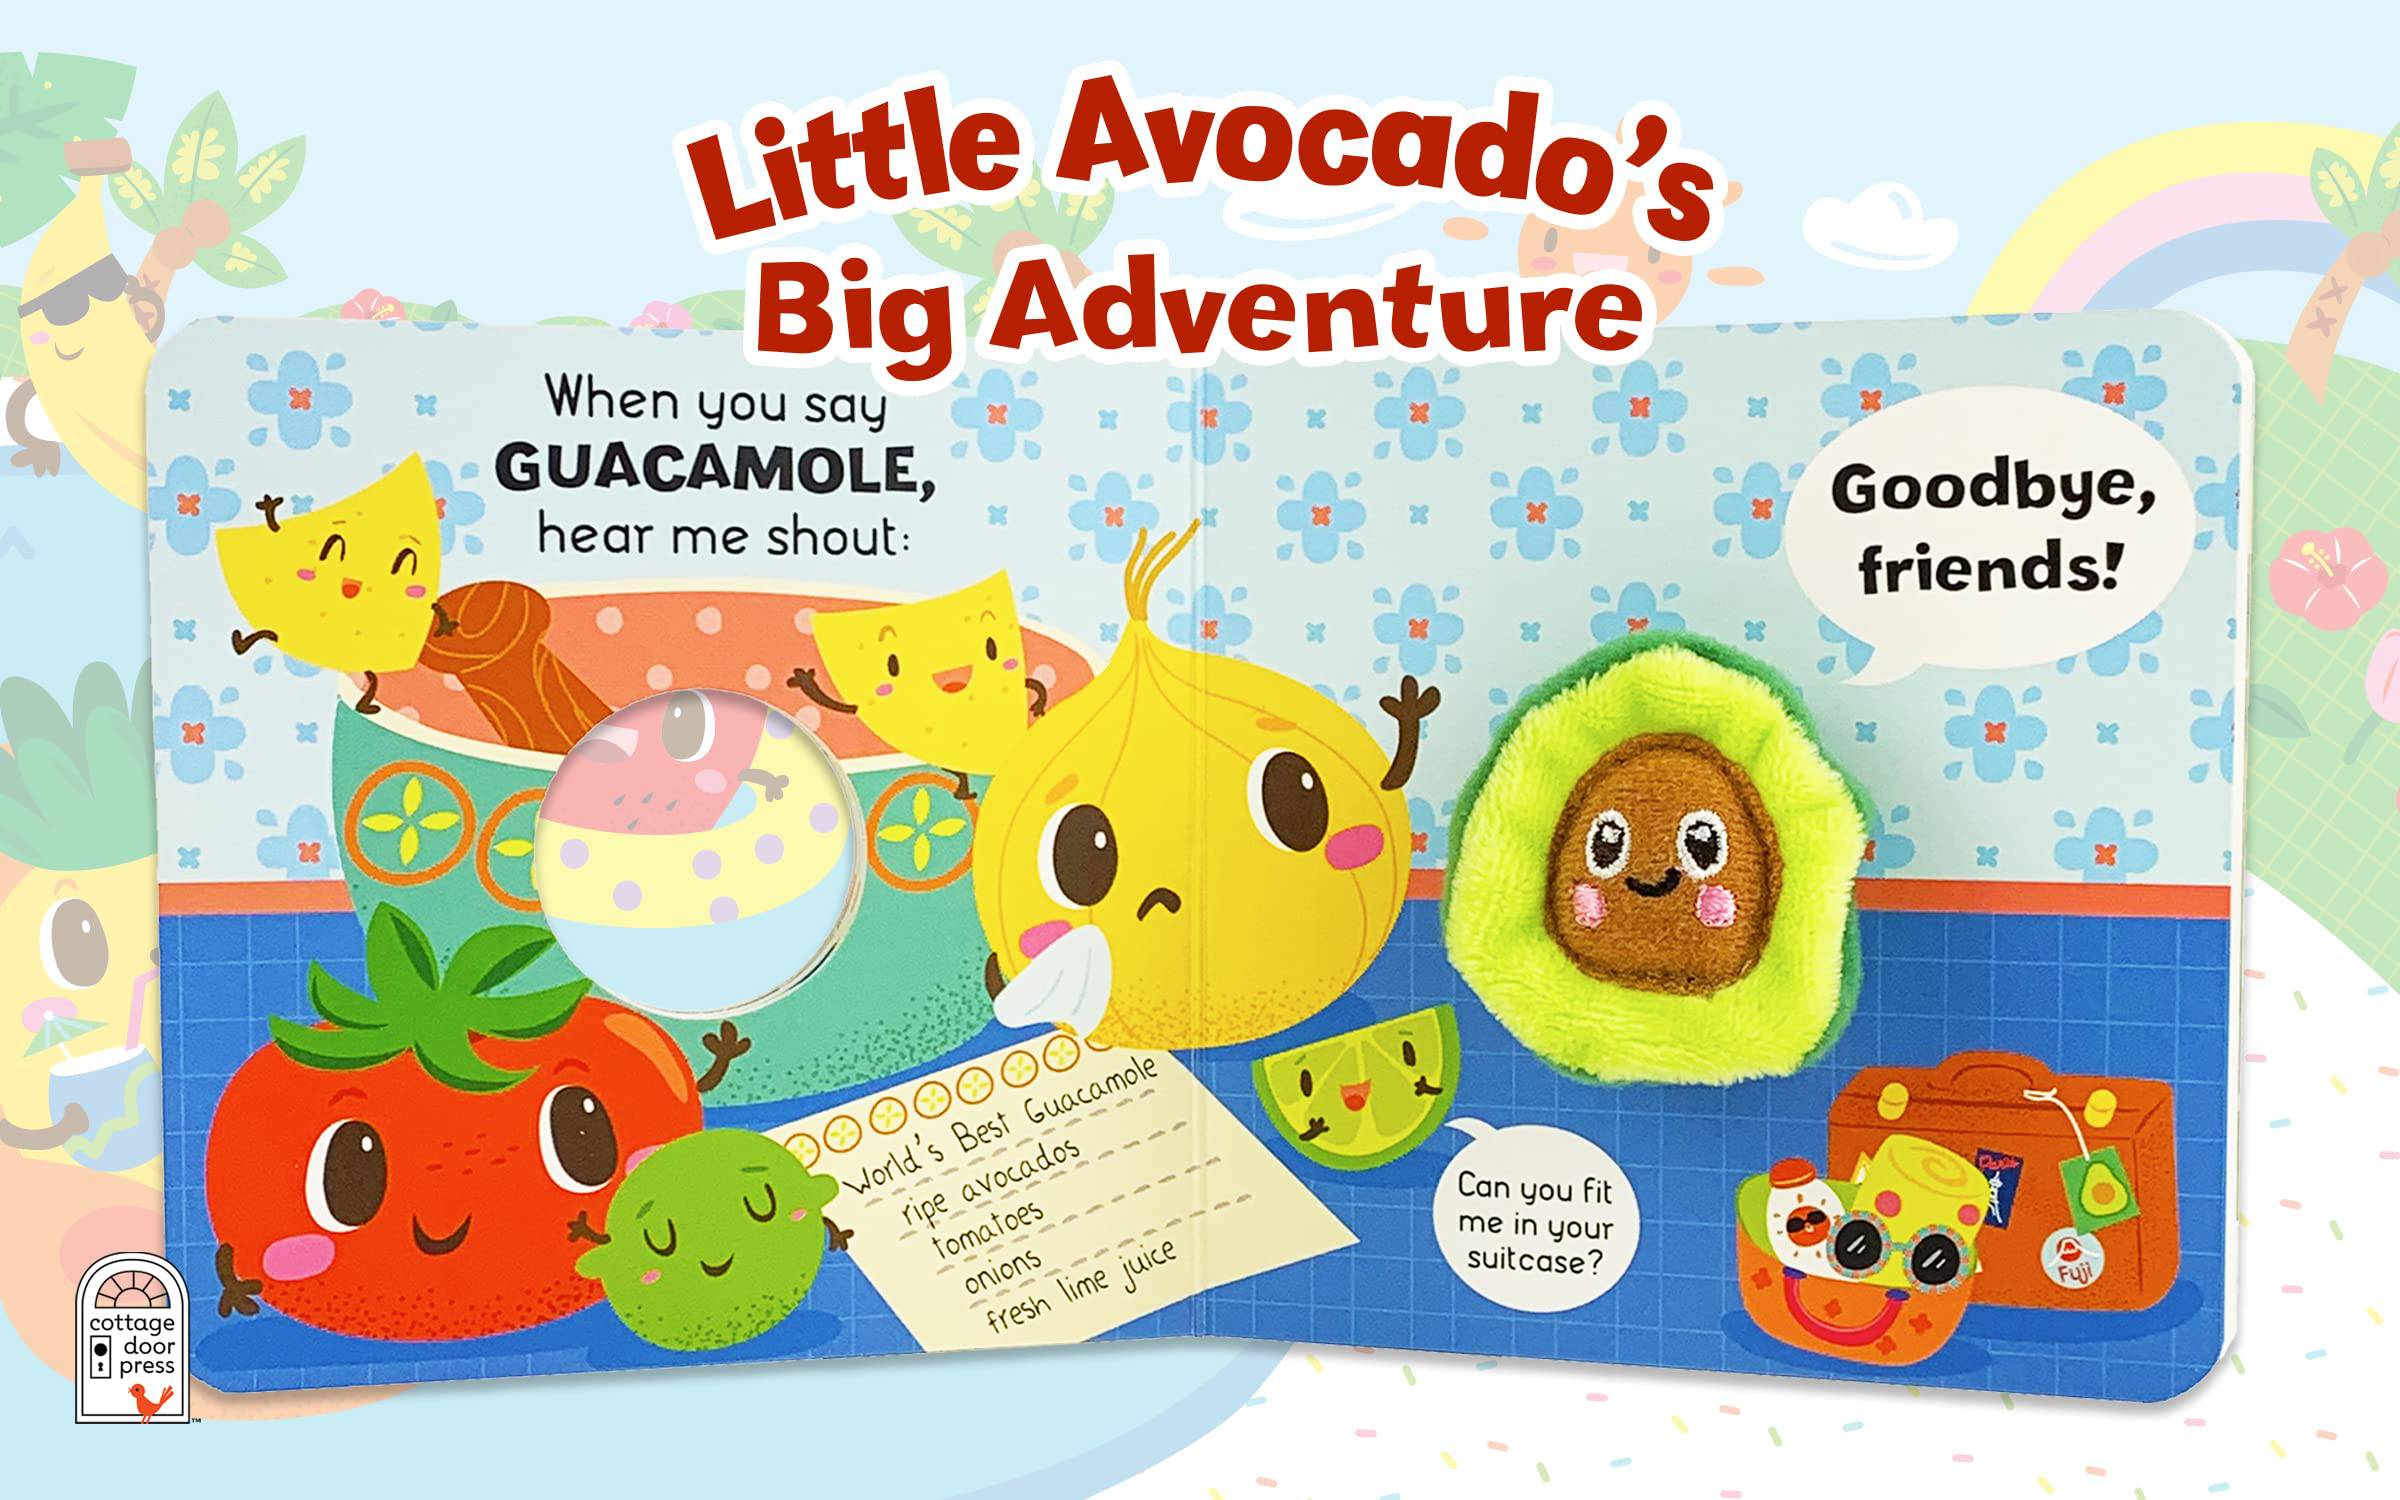 Little Avocados Big Adventure Puppet Book - Twinkle Twinkle Little One